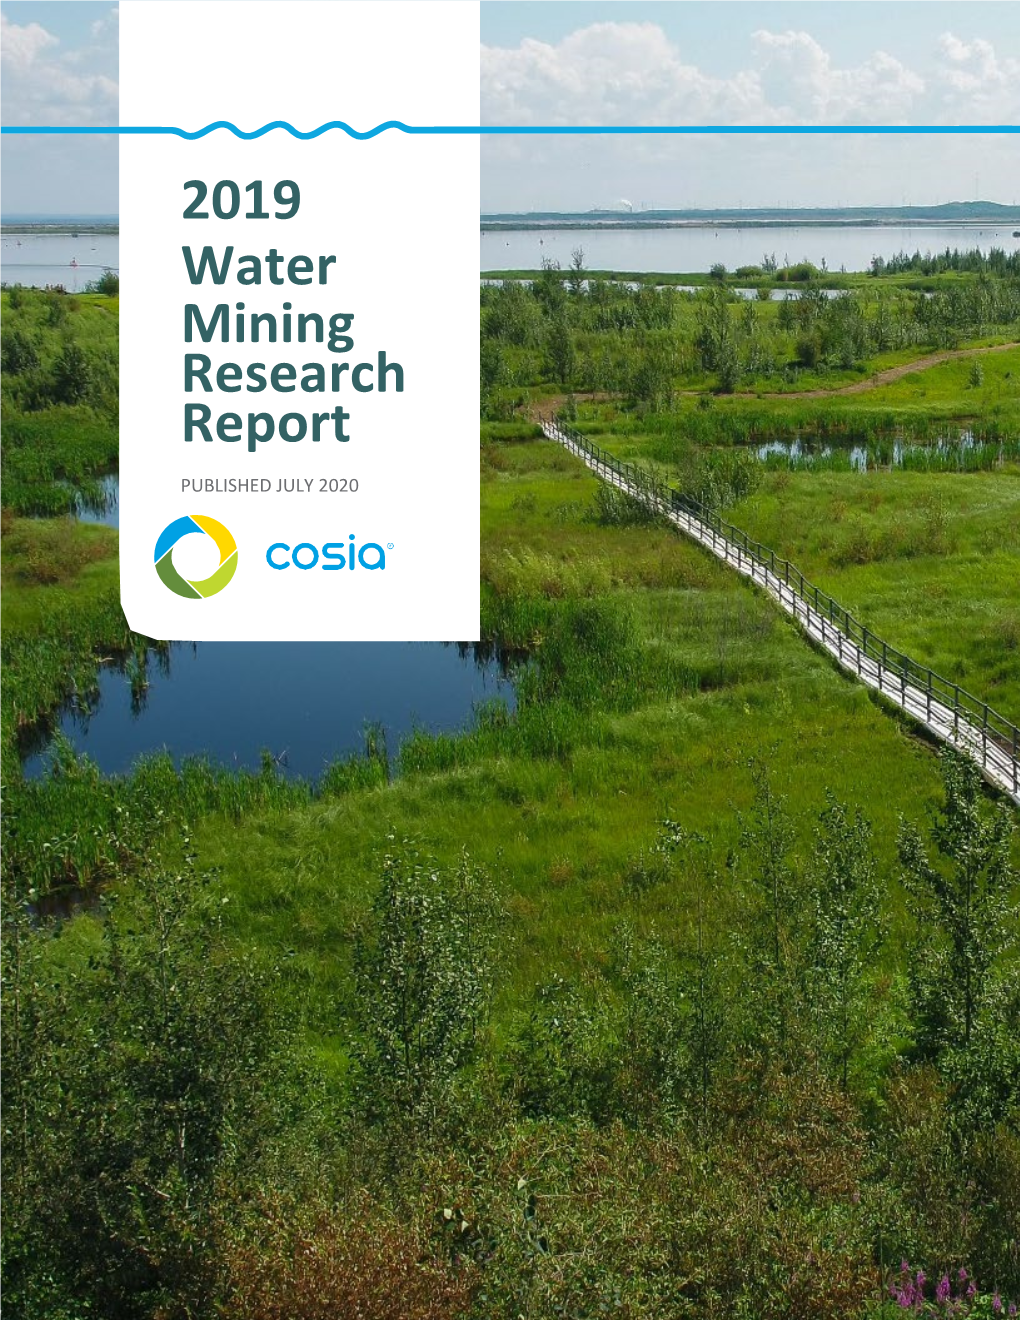 2019 Water Mining Research Report PUBLISHED JULY 2020